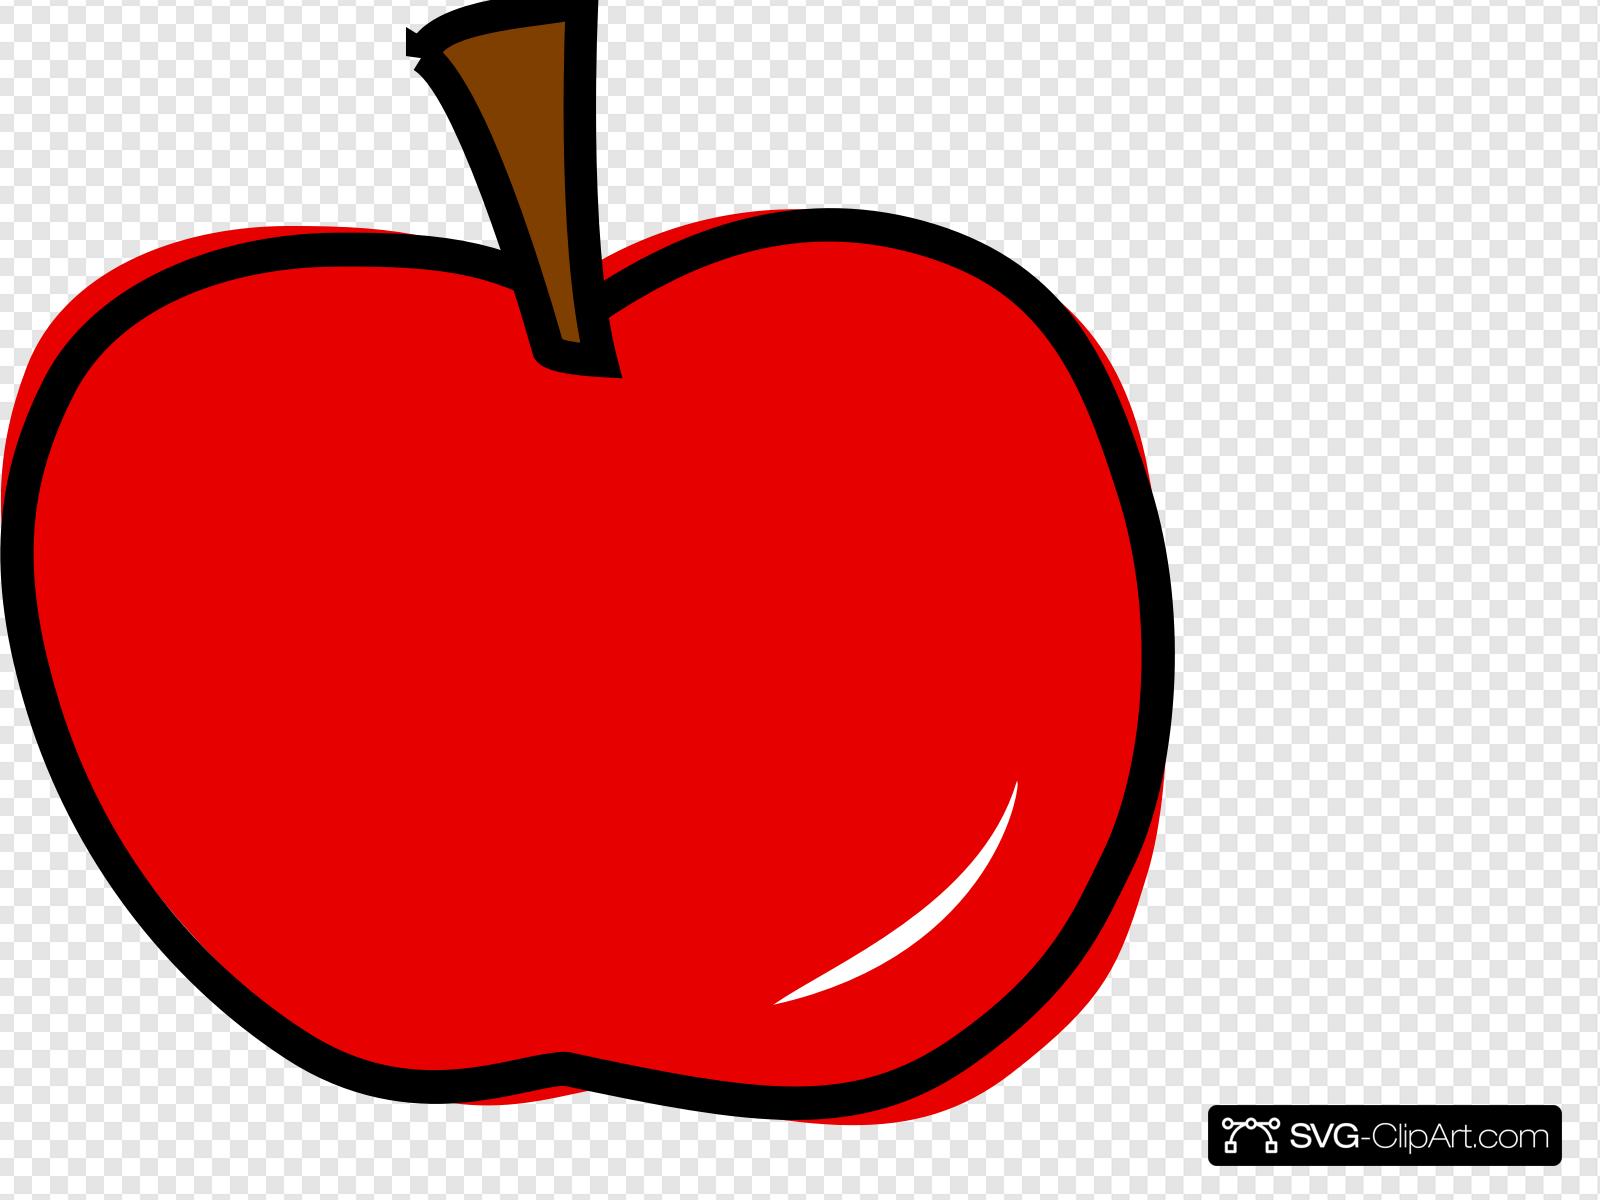 Apple Clip art, Icon and SVG